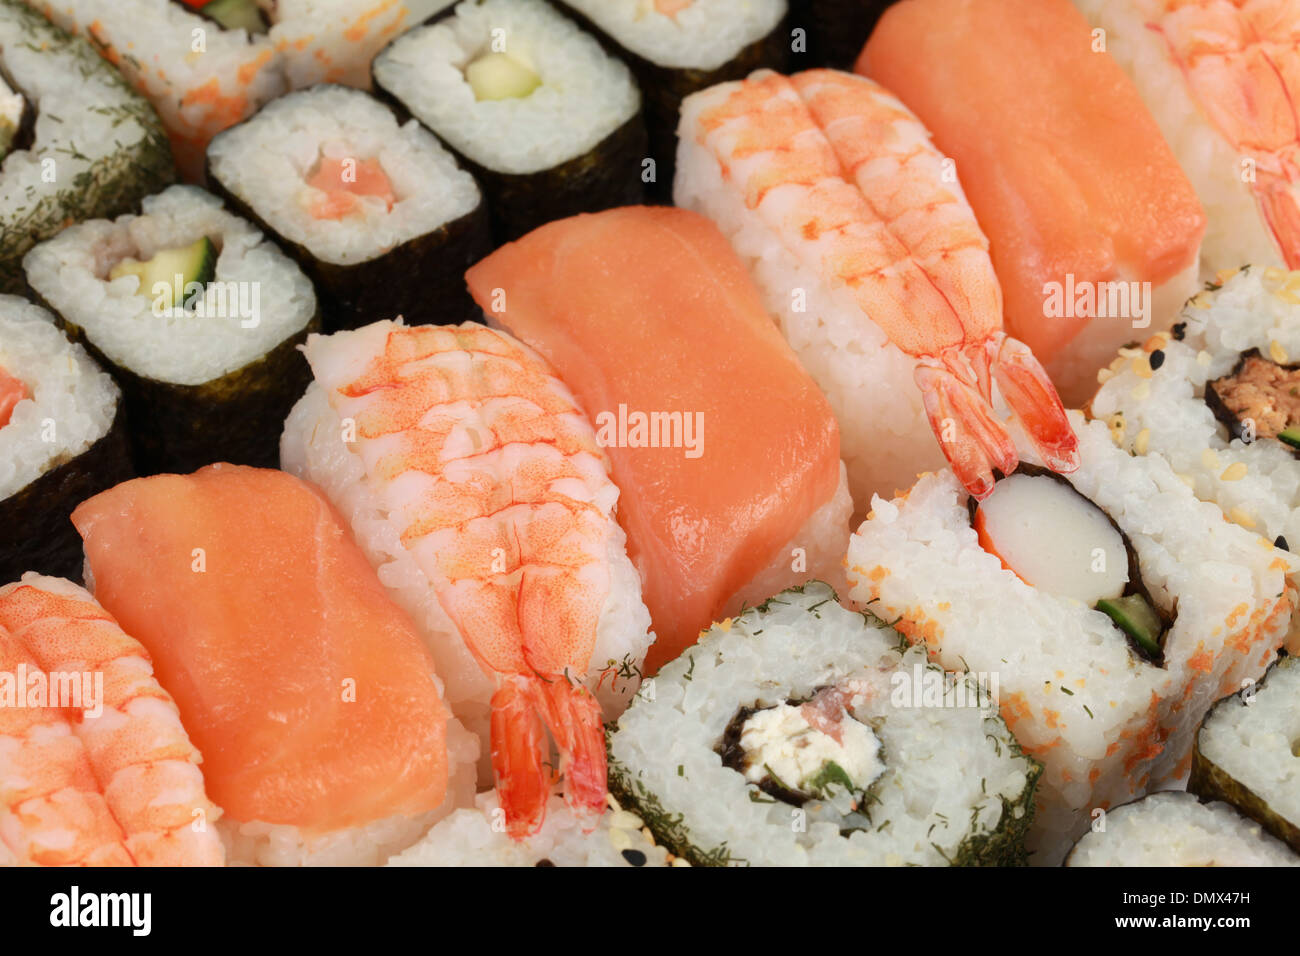 Choice of Japanese Sushi with rice, salmon and vegetables Stock Photo